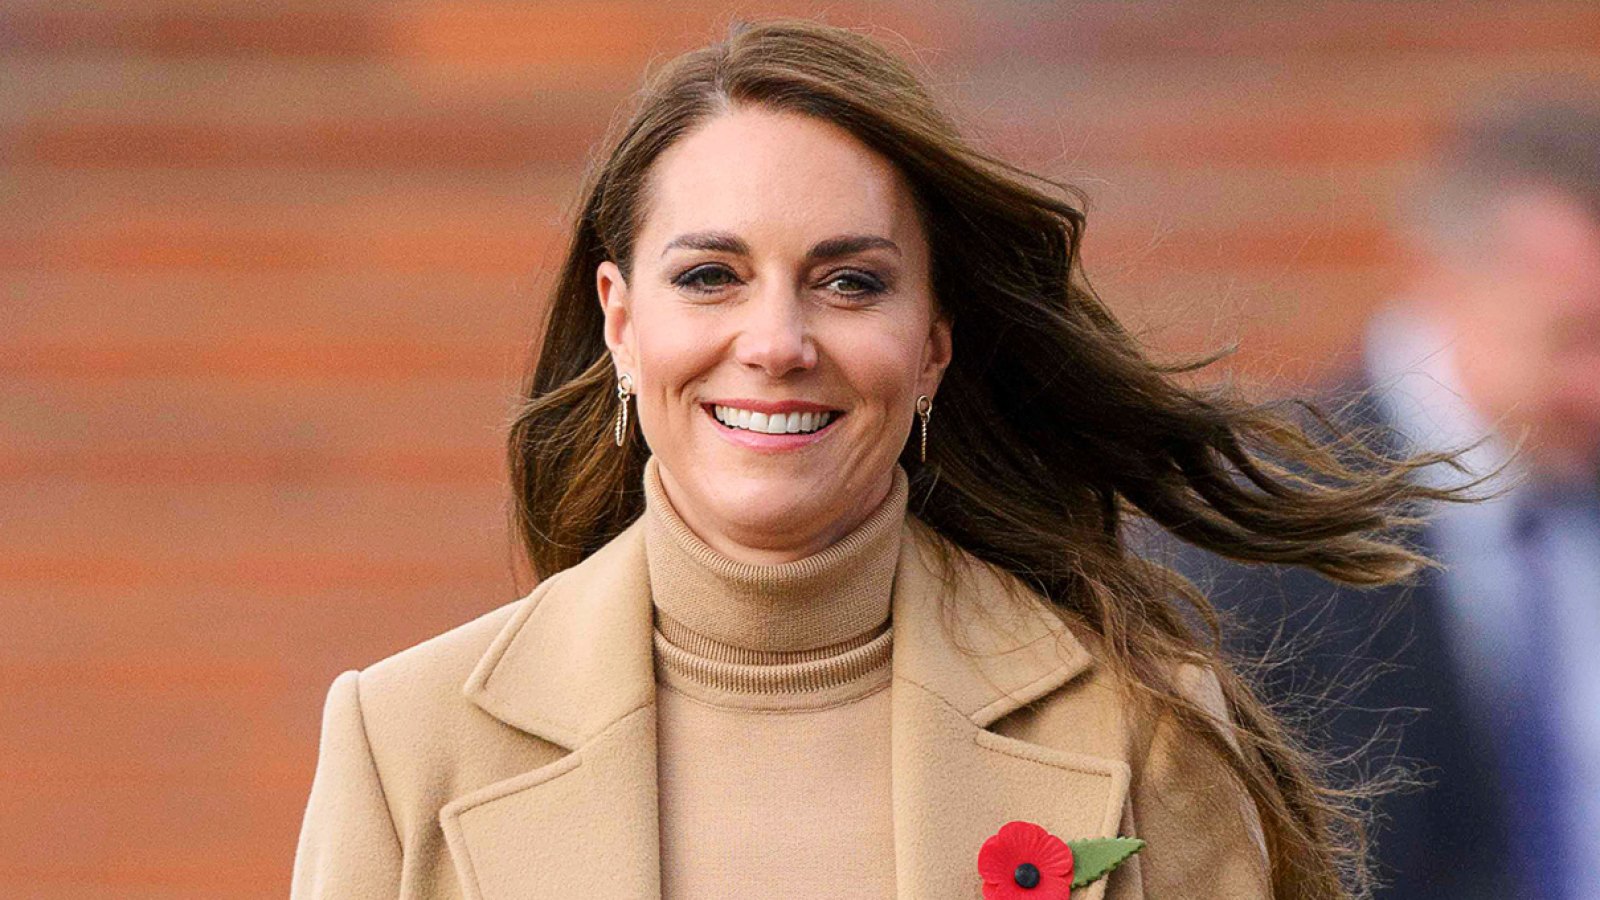 Princess Kate Will Pay Tribute to Queen Elizabeth II While Hosting 2nd Annual Christmas Concert at Westminster Abbey 014 Prince William and Catherine Princess of Wales visit The Street, Scarborough, UK - 03 Nov 2022